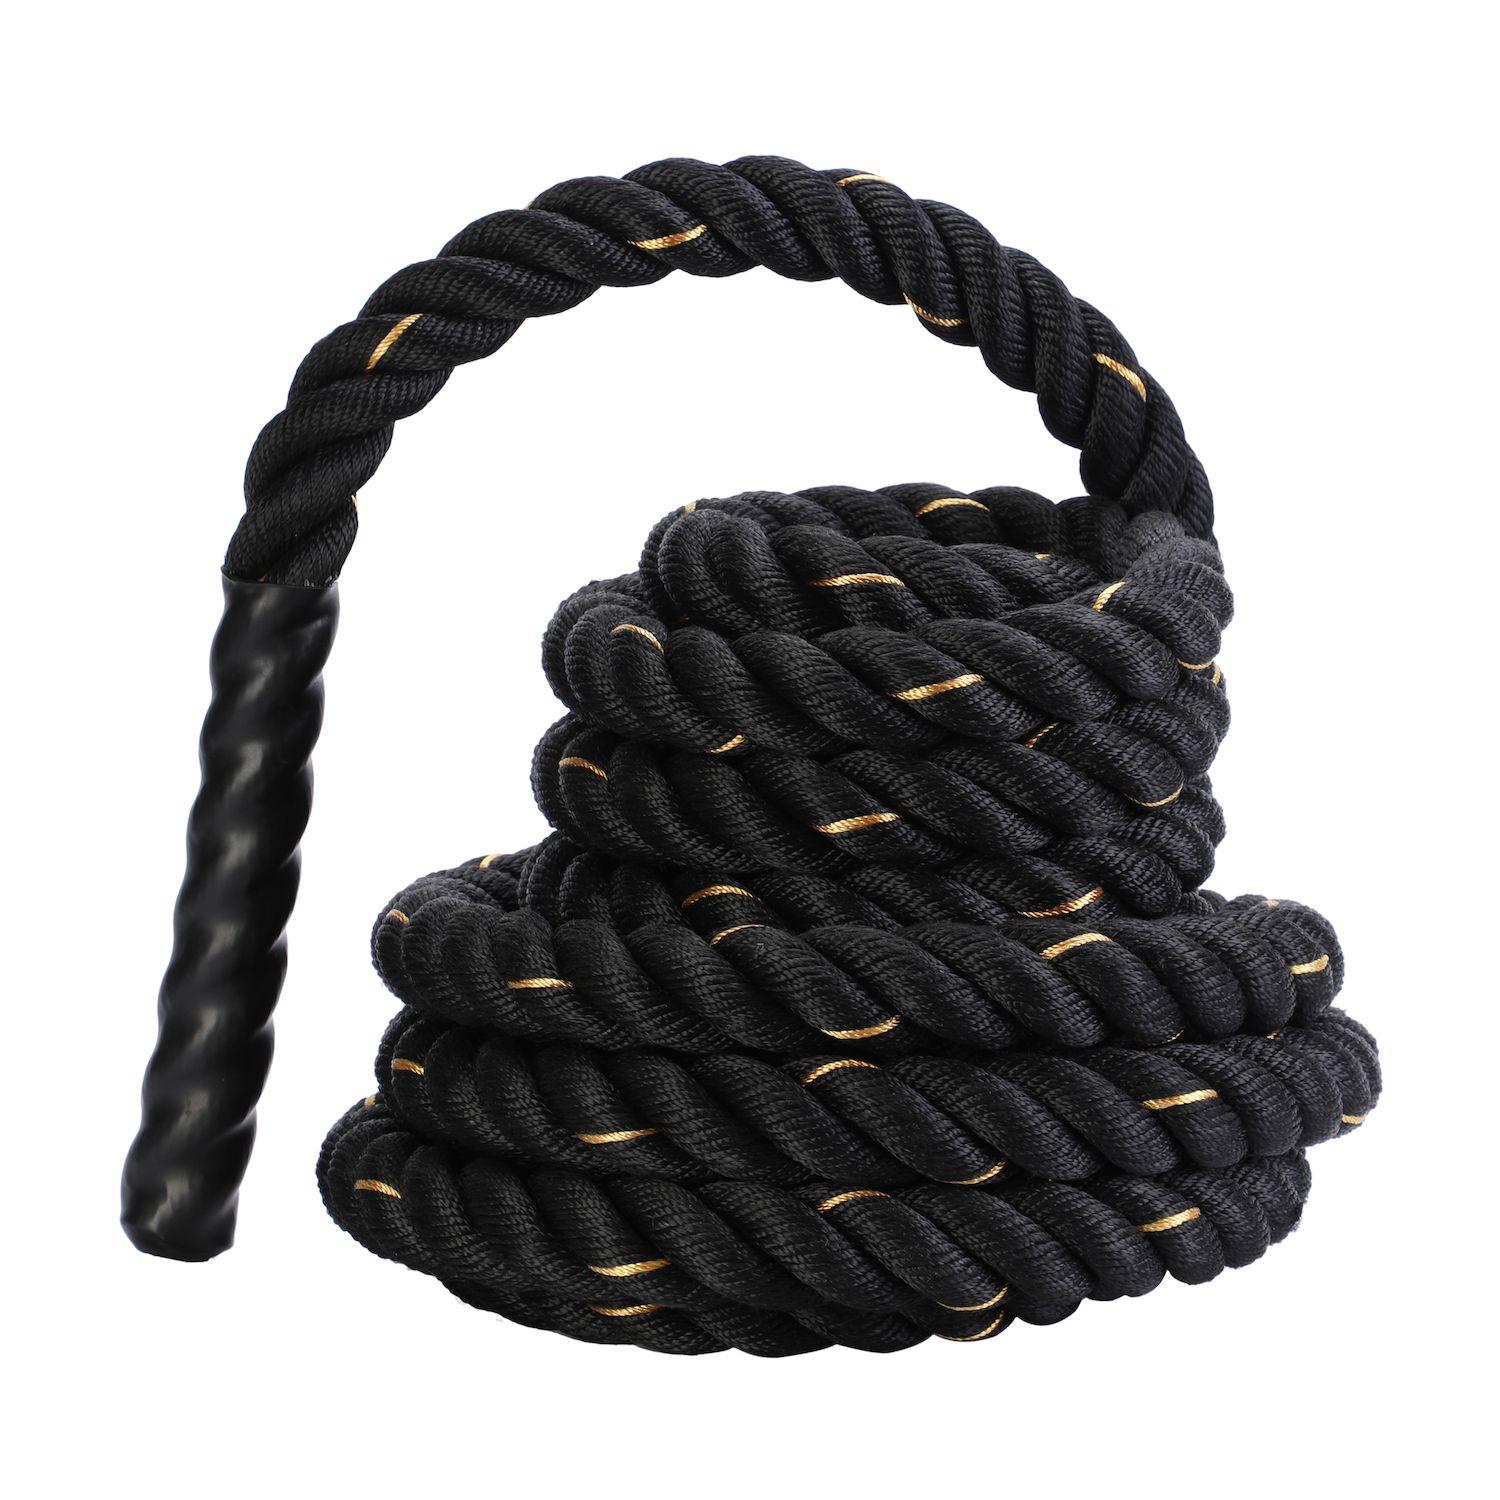 Image for HolaHatha Home Gym Exercise Equipment Strength Training 30' Workout Rope, Black at Kohl's.